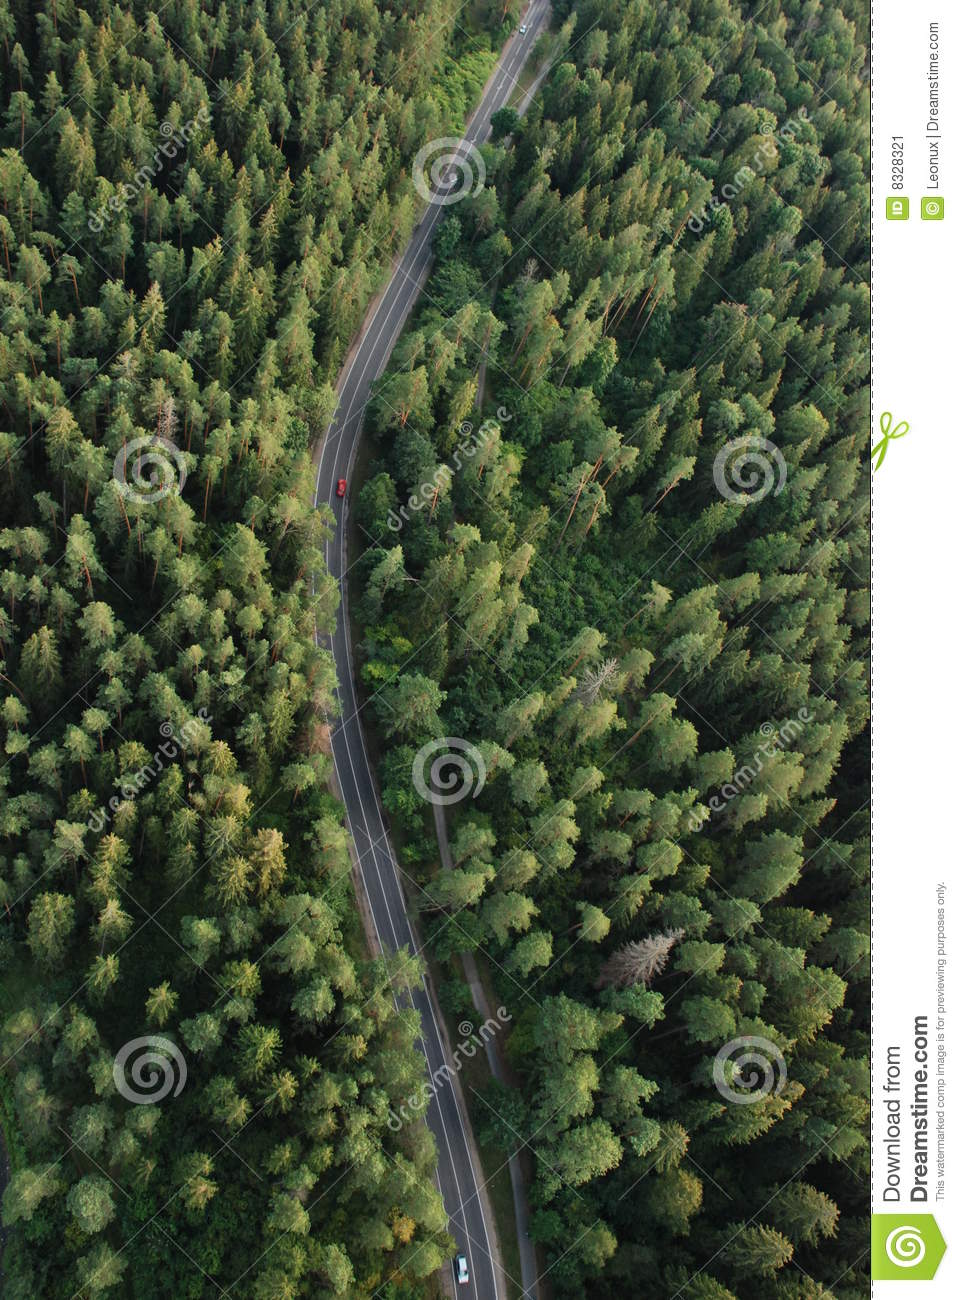 More Similar Stock Images Of   Forest From The Birdseye View